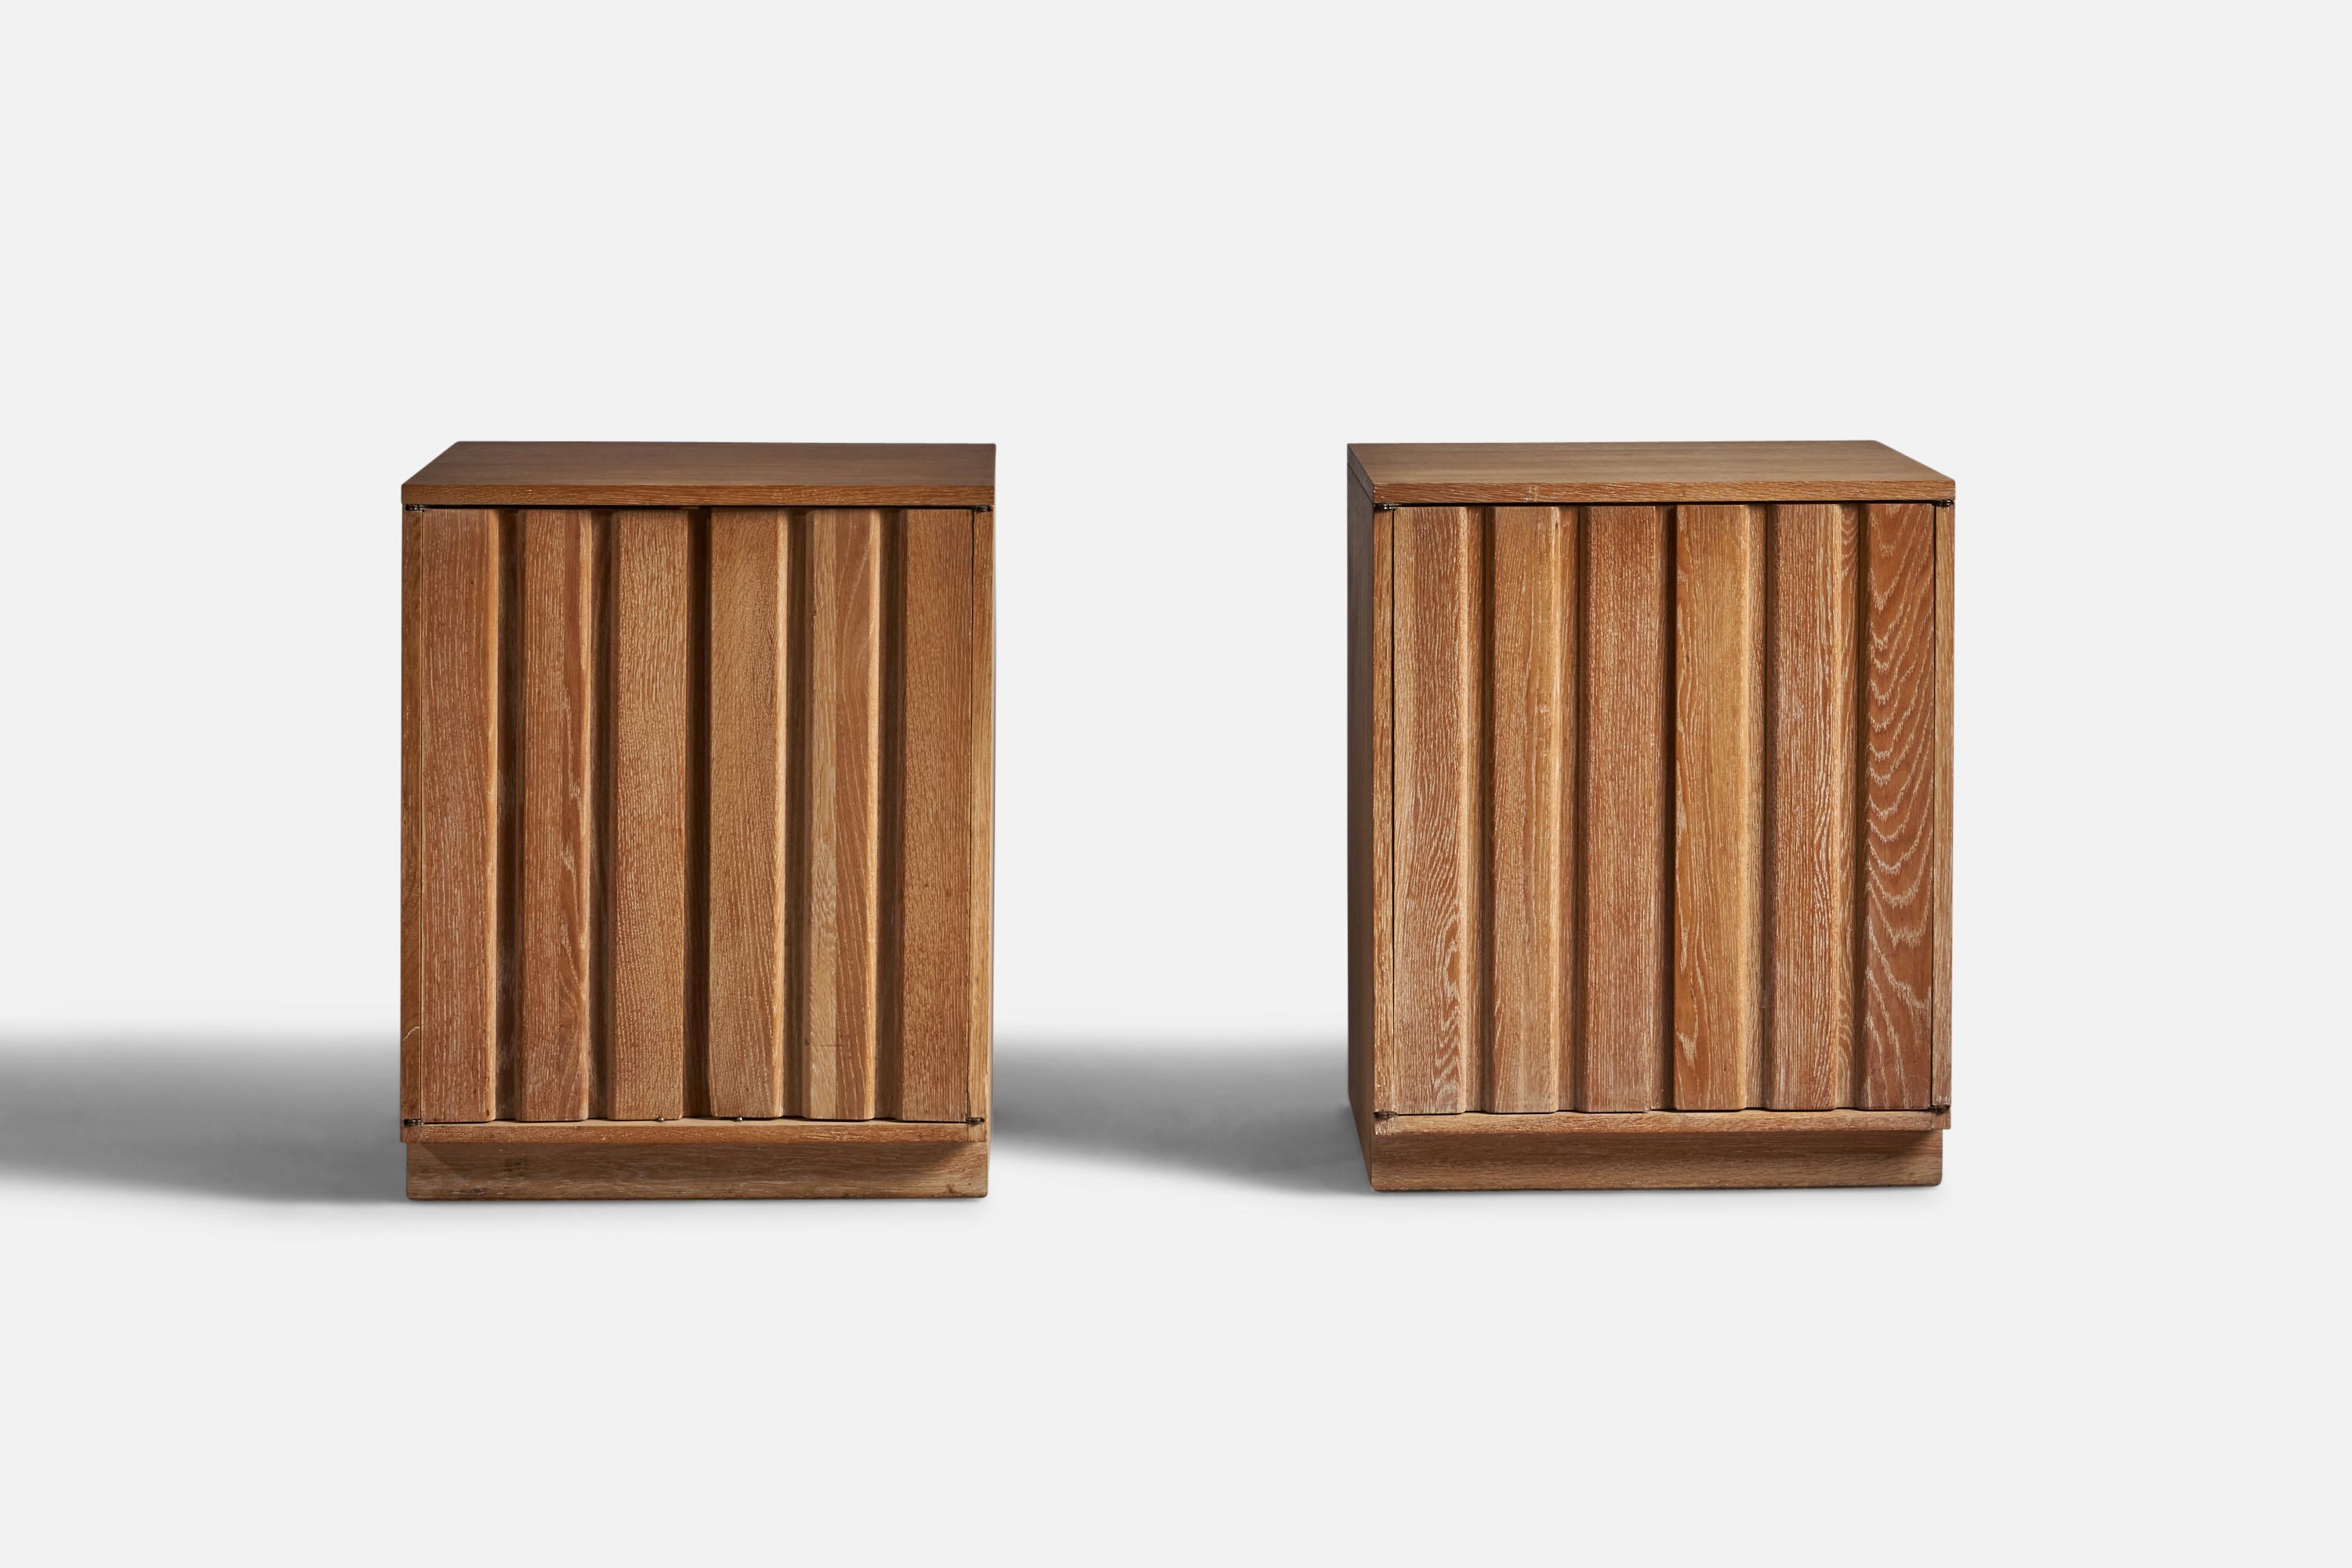 A pair of solid oak nightstands or cabinets, designed and produced by Sligh Furniture, Grand Rapids, Michigan, US, 1950s.